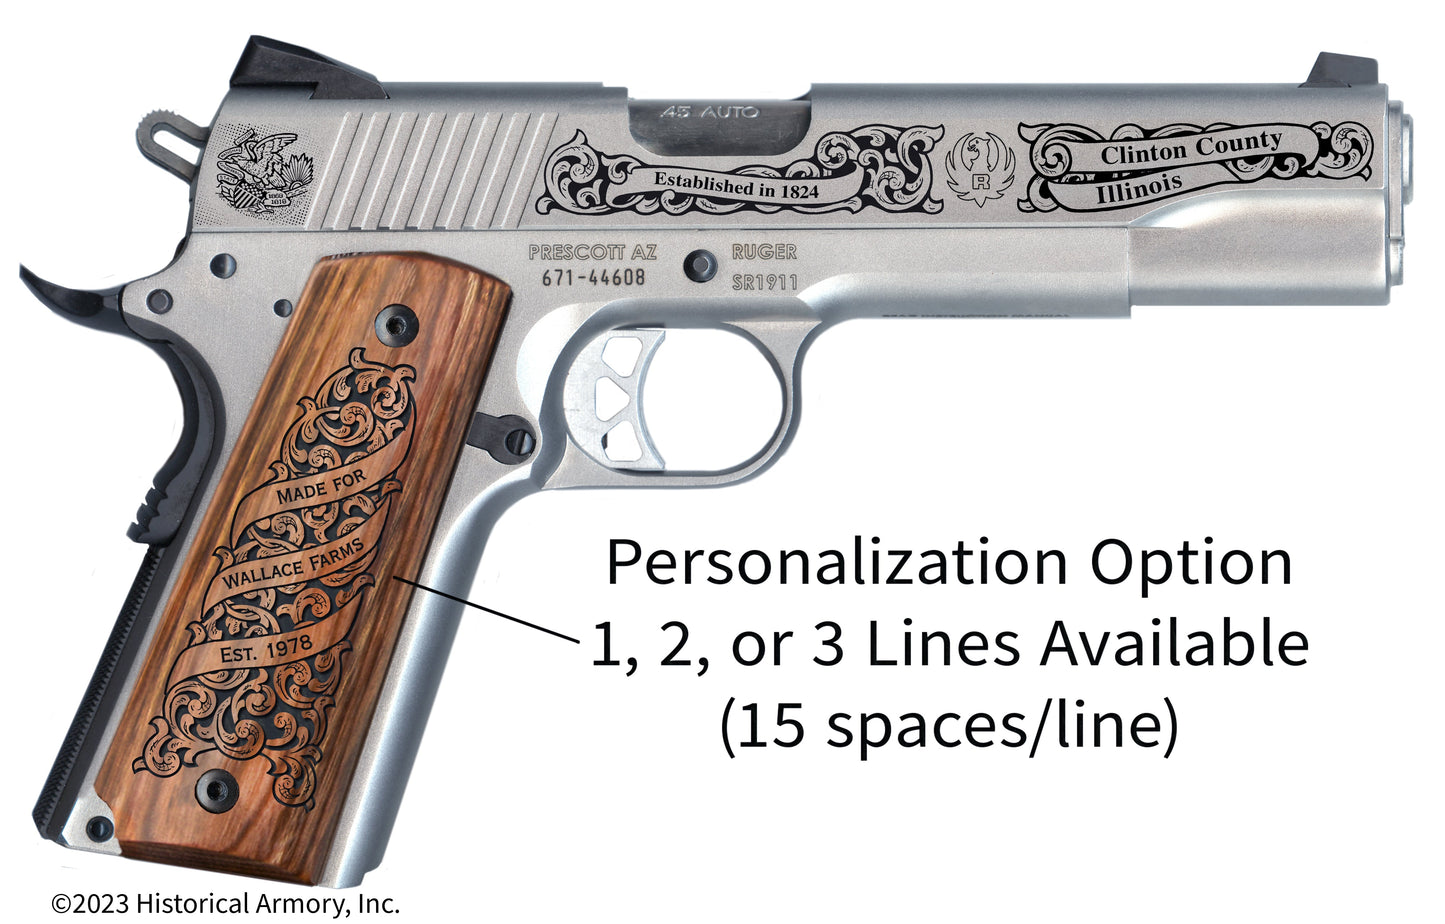 Clinton County Illinois Personalized Engraved .45 Auto Ruger 1911